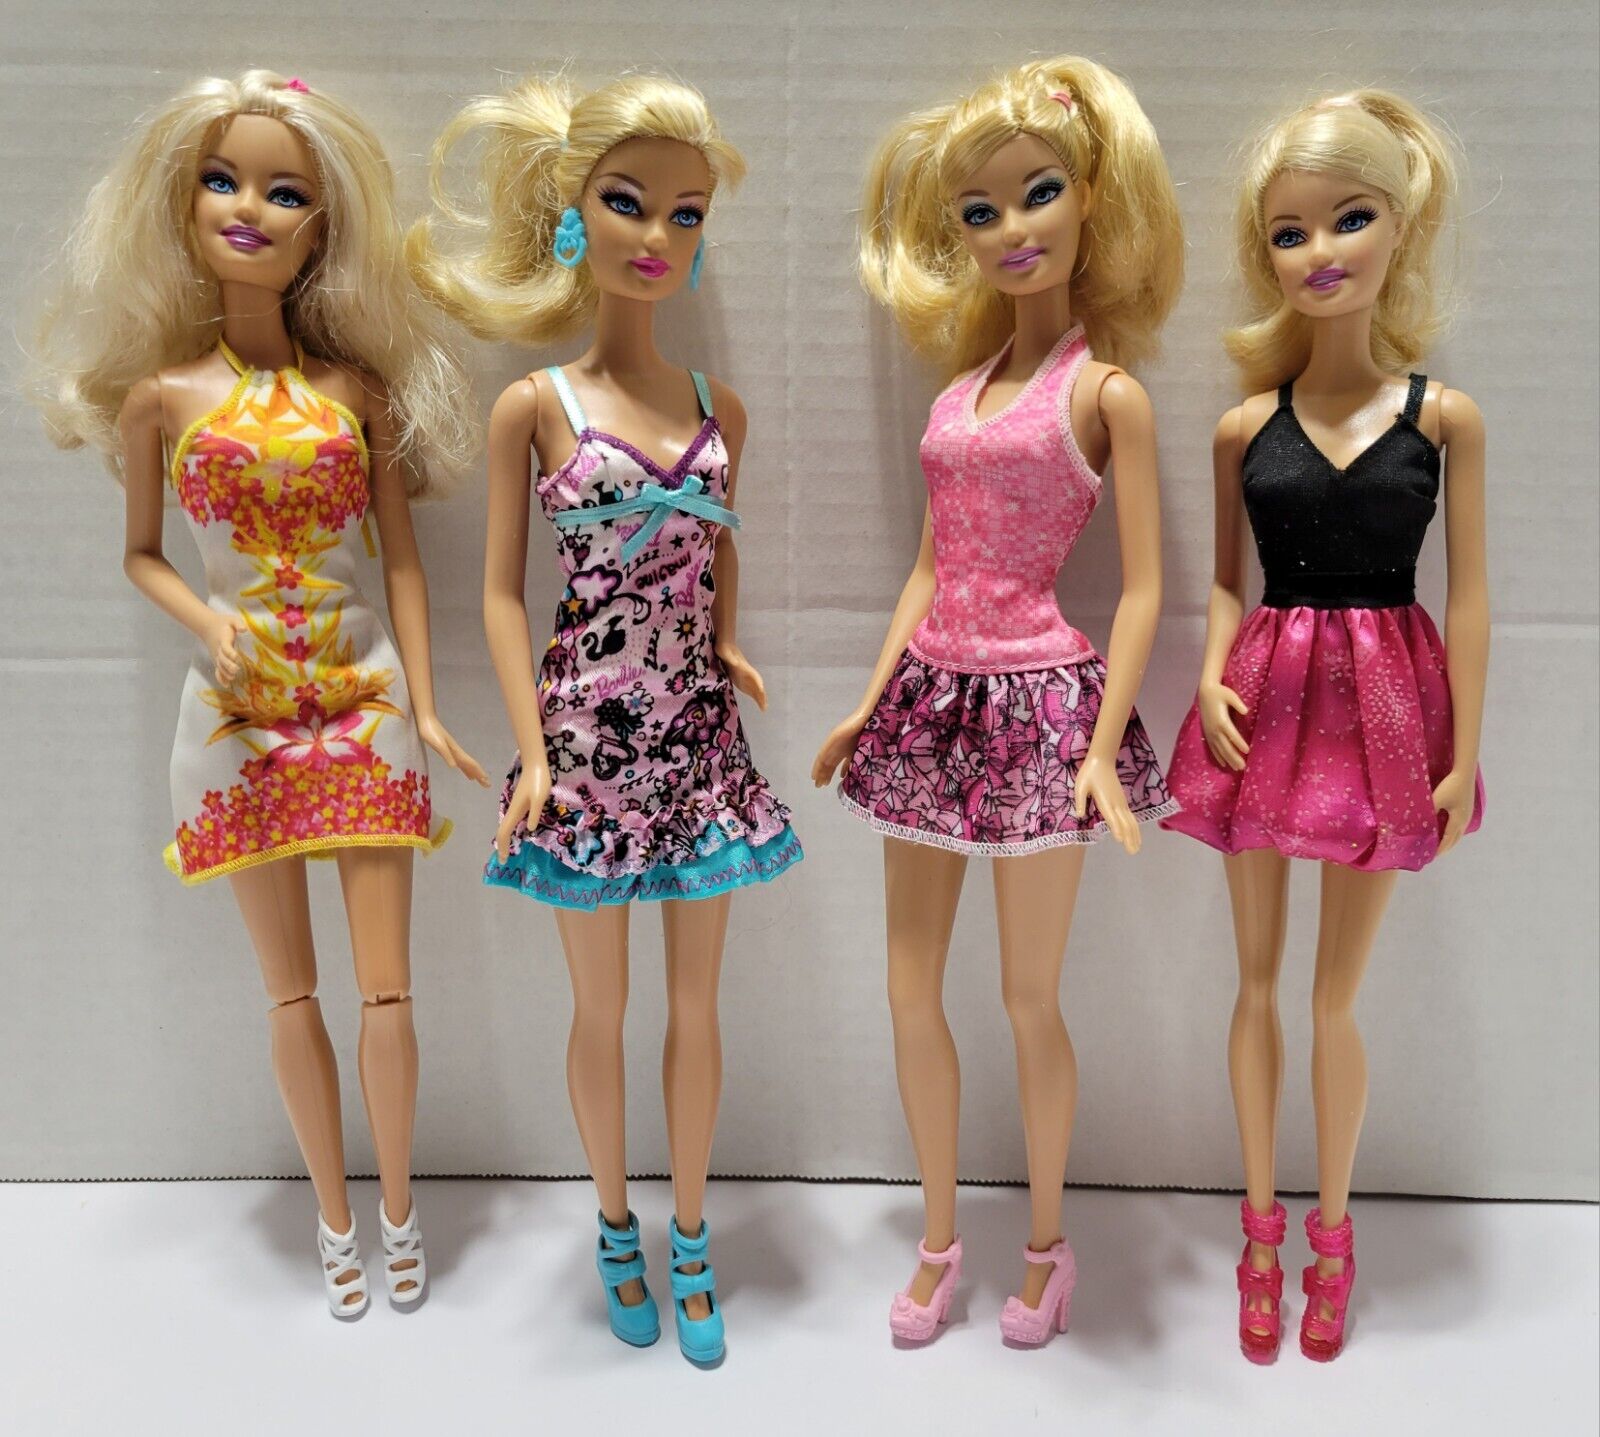 BARBIE DOLL LOT OF 4: Generation Girl CEO Glam Fashion Fever w/Clothing & Shoes Mattel